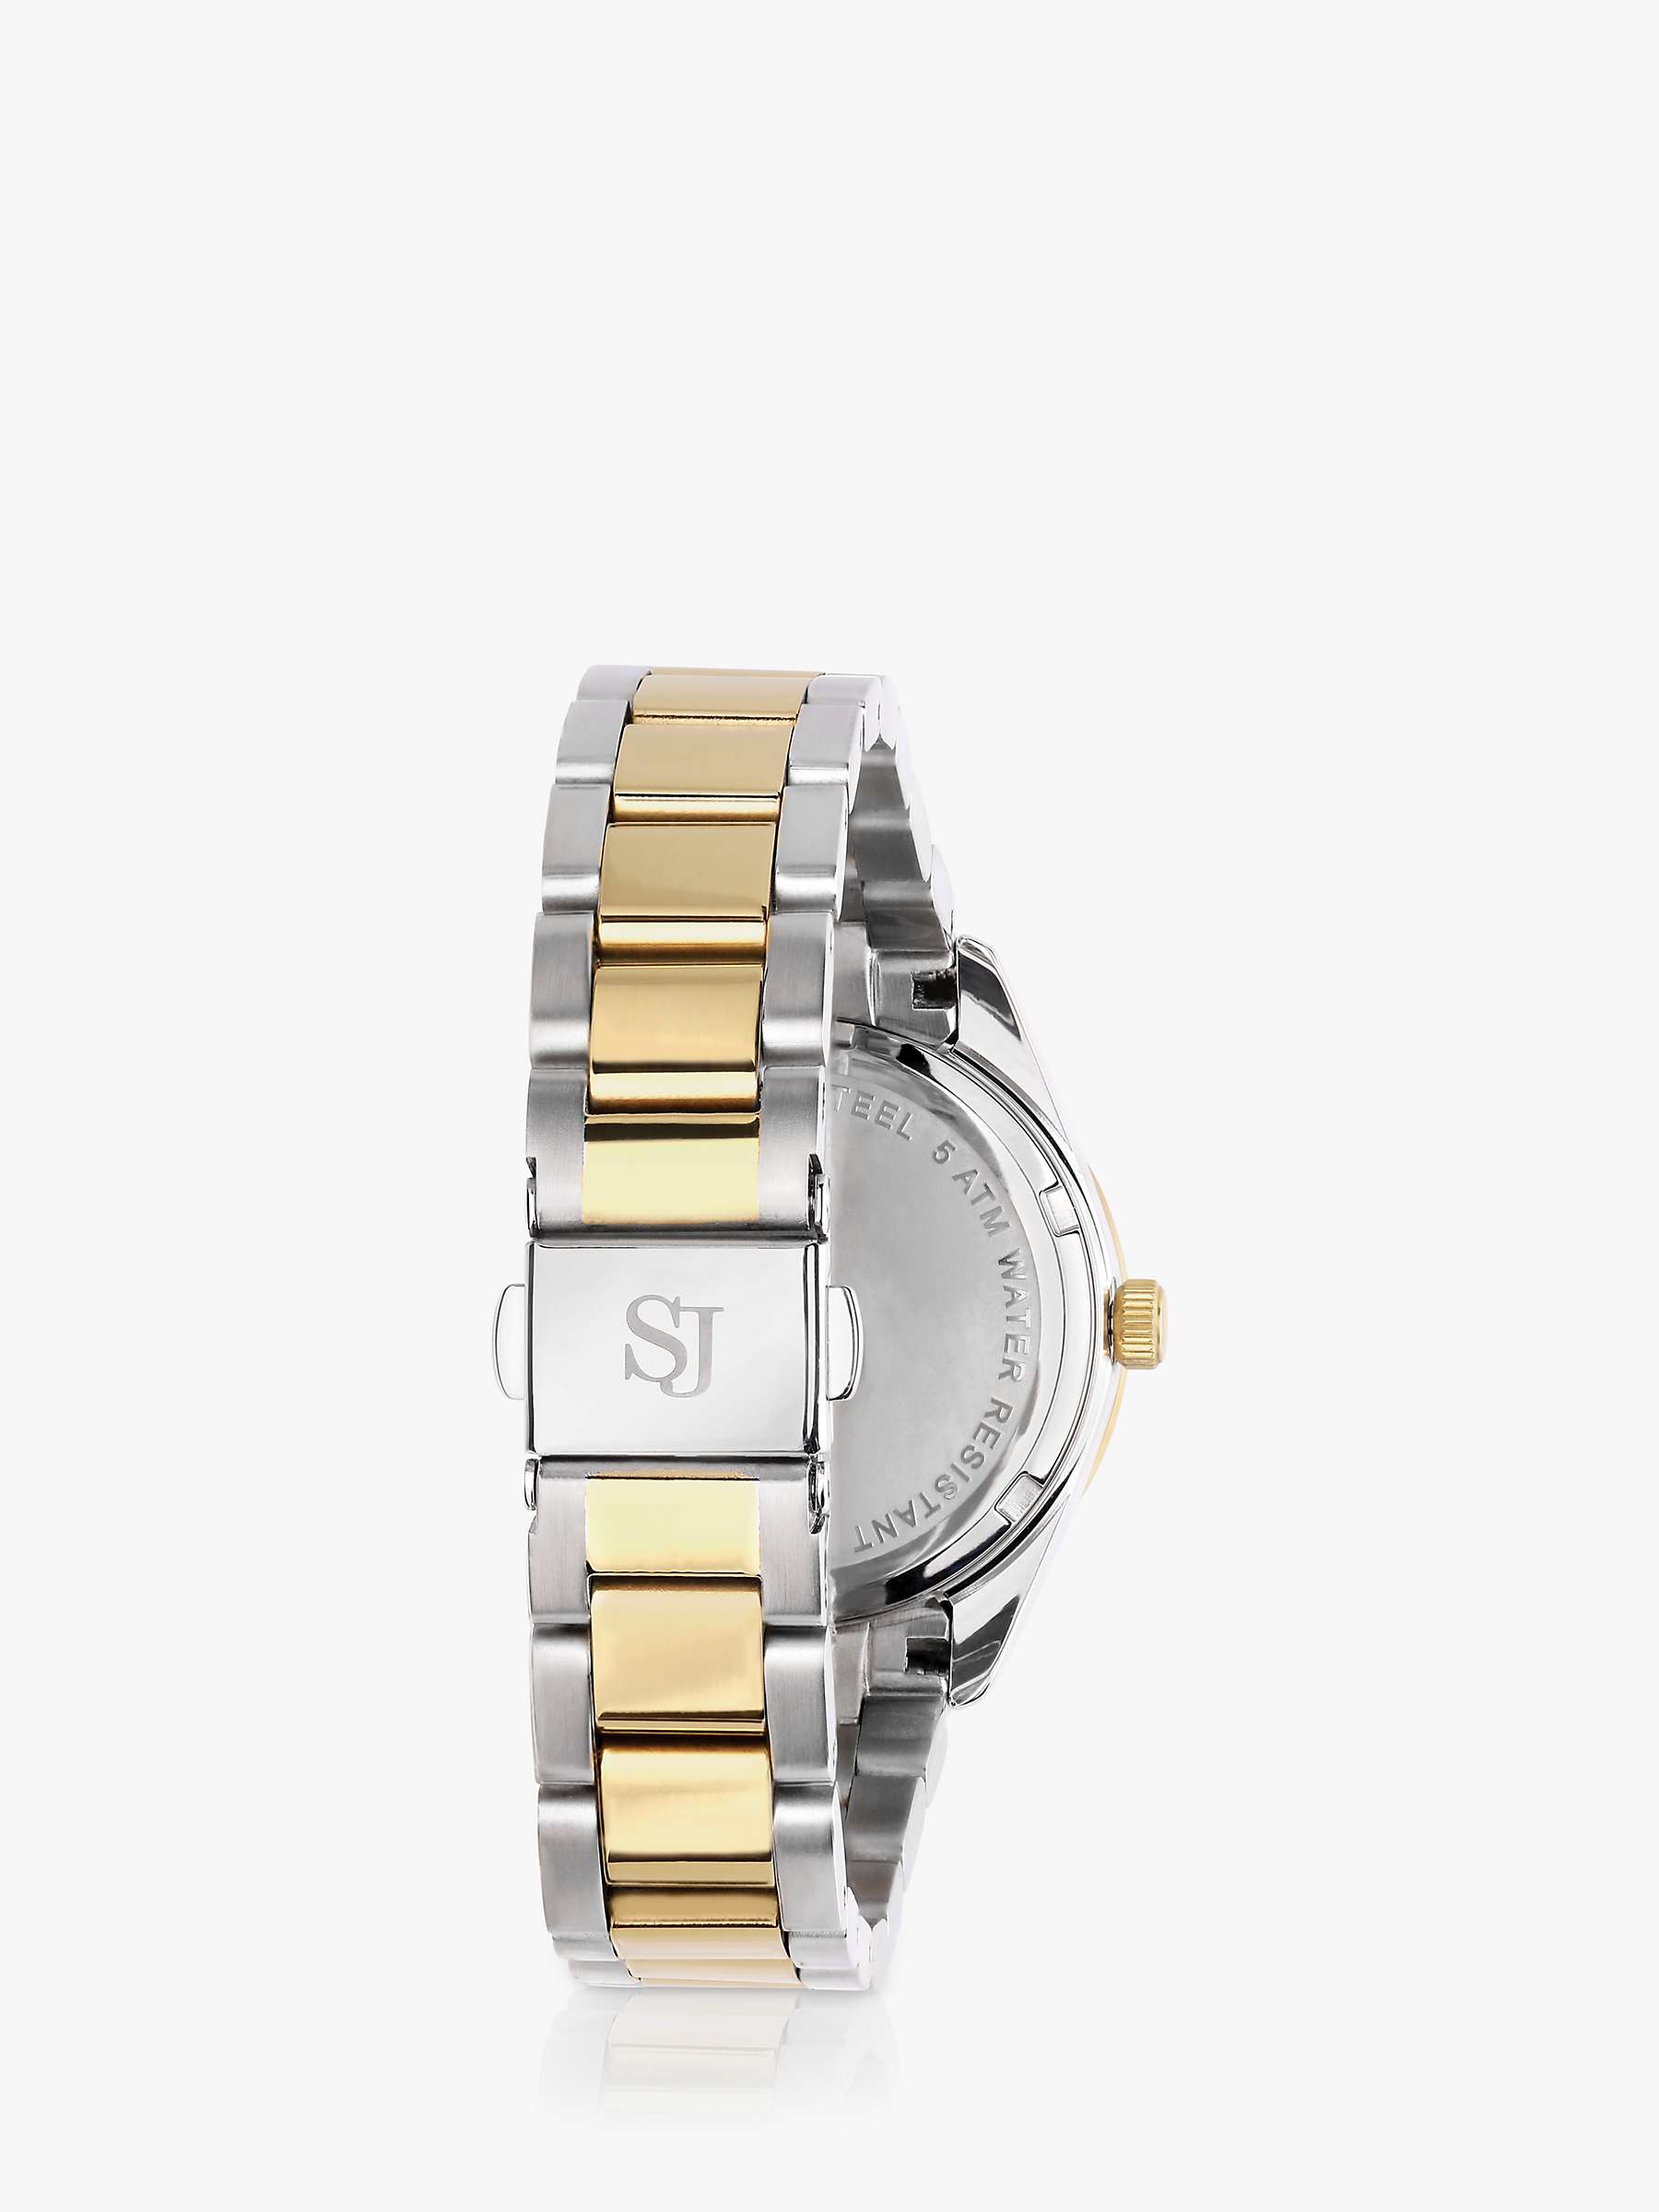 Buy Sif Jakobs Jewellery Valeria Two Tone Zirconia Dial Watch, Gold/Silver Online at johnlewis.com